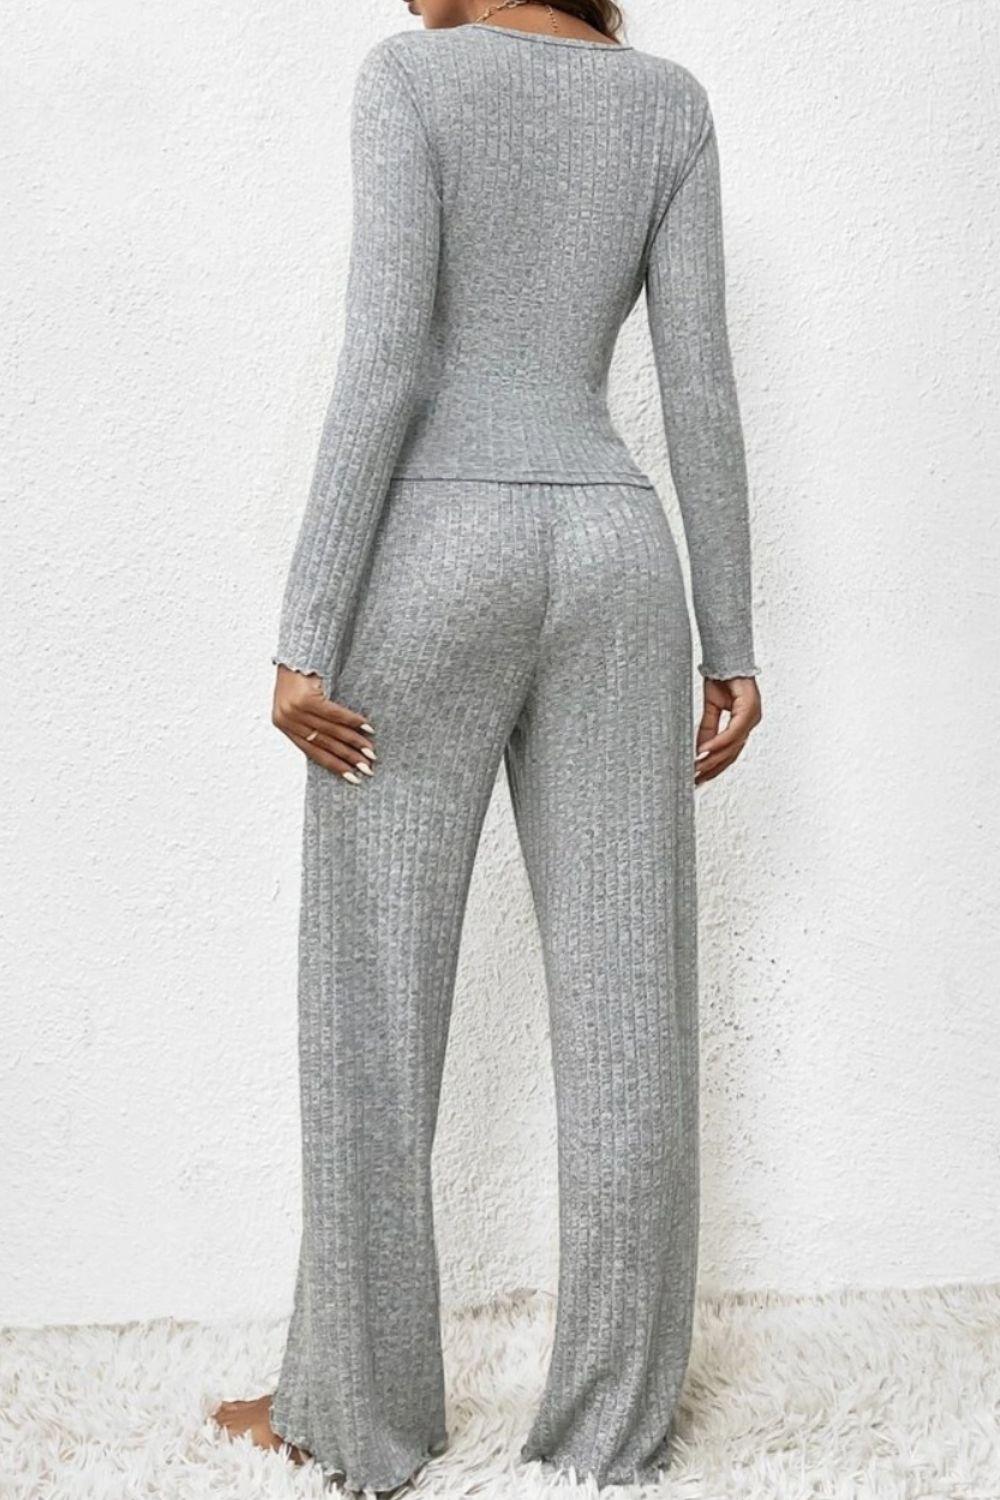 a woman wearing a grey knit jumpsuit and heels